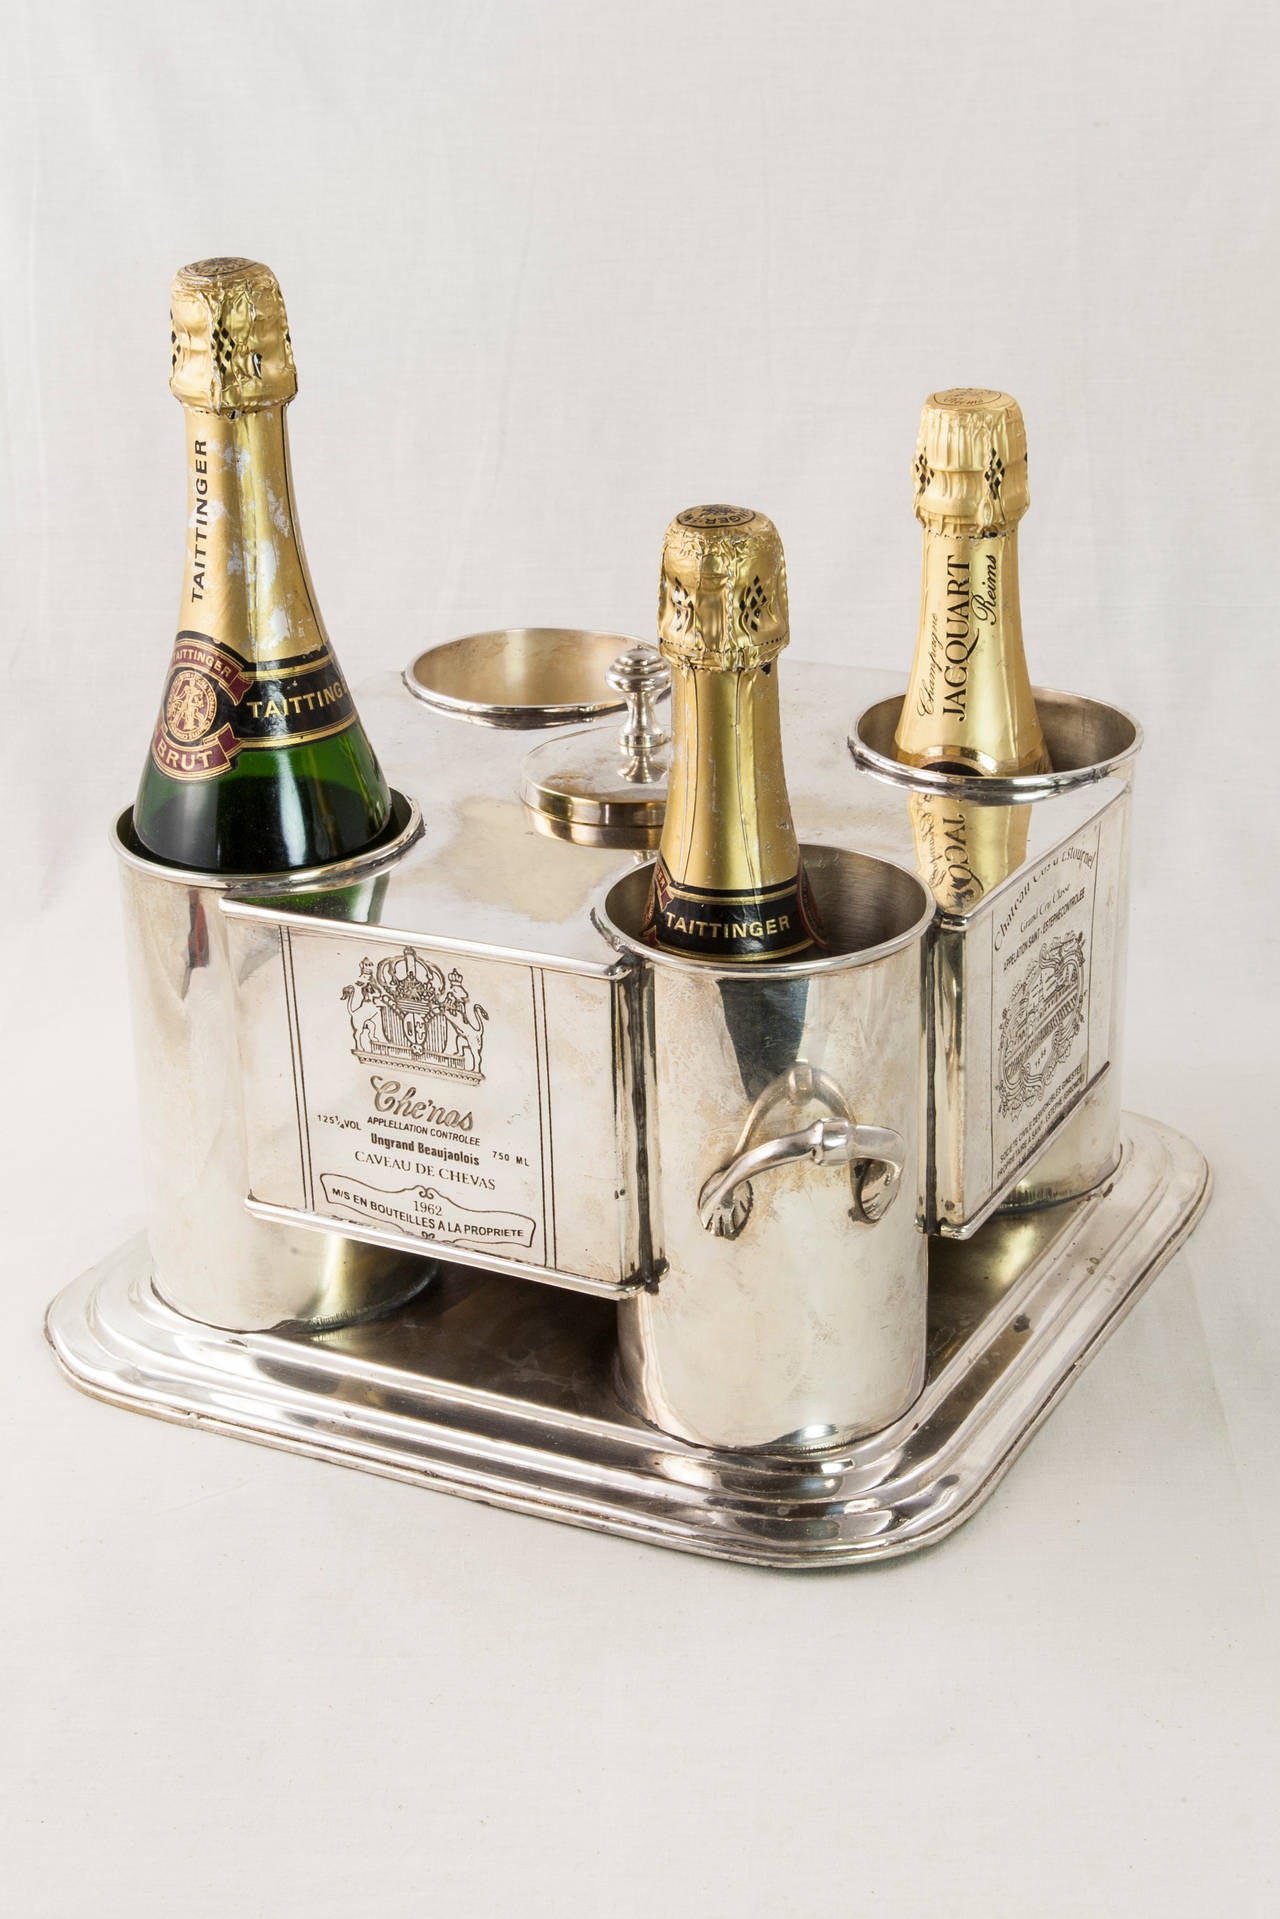 This large stunning mid-20th century silver plate wine chiller holds four bottles and has a central compartment with lid for ice. With silver handles at each side for carrying, this piece will bring an elegant touch to any dining or bar space. Each